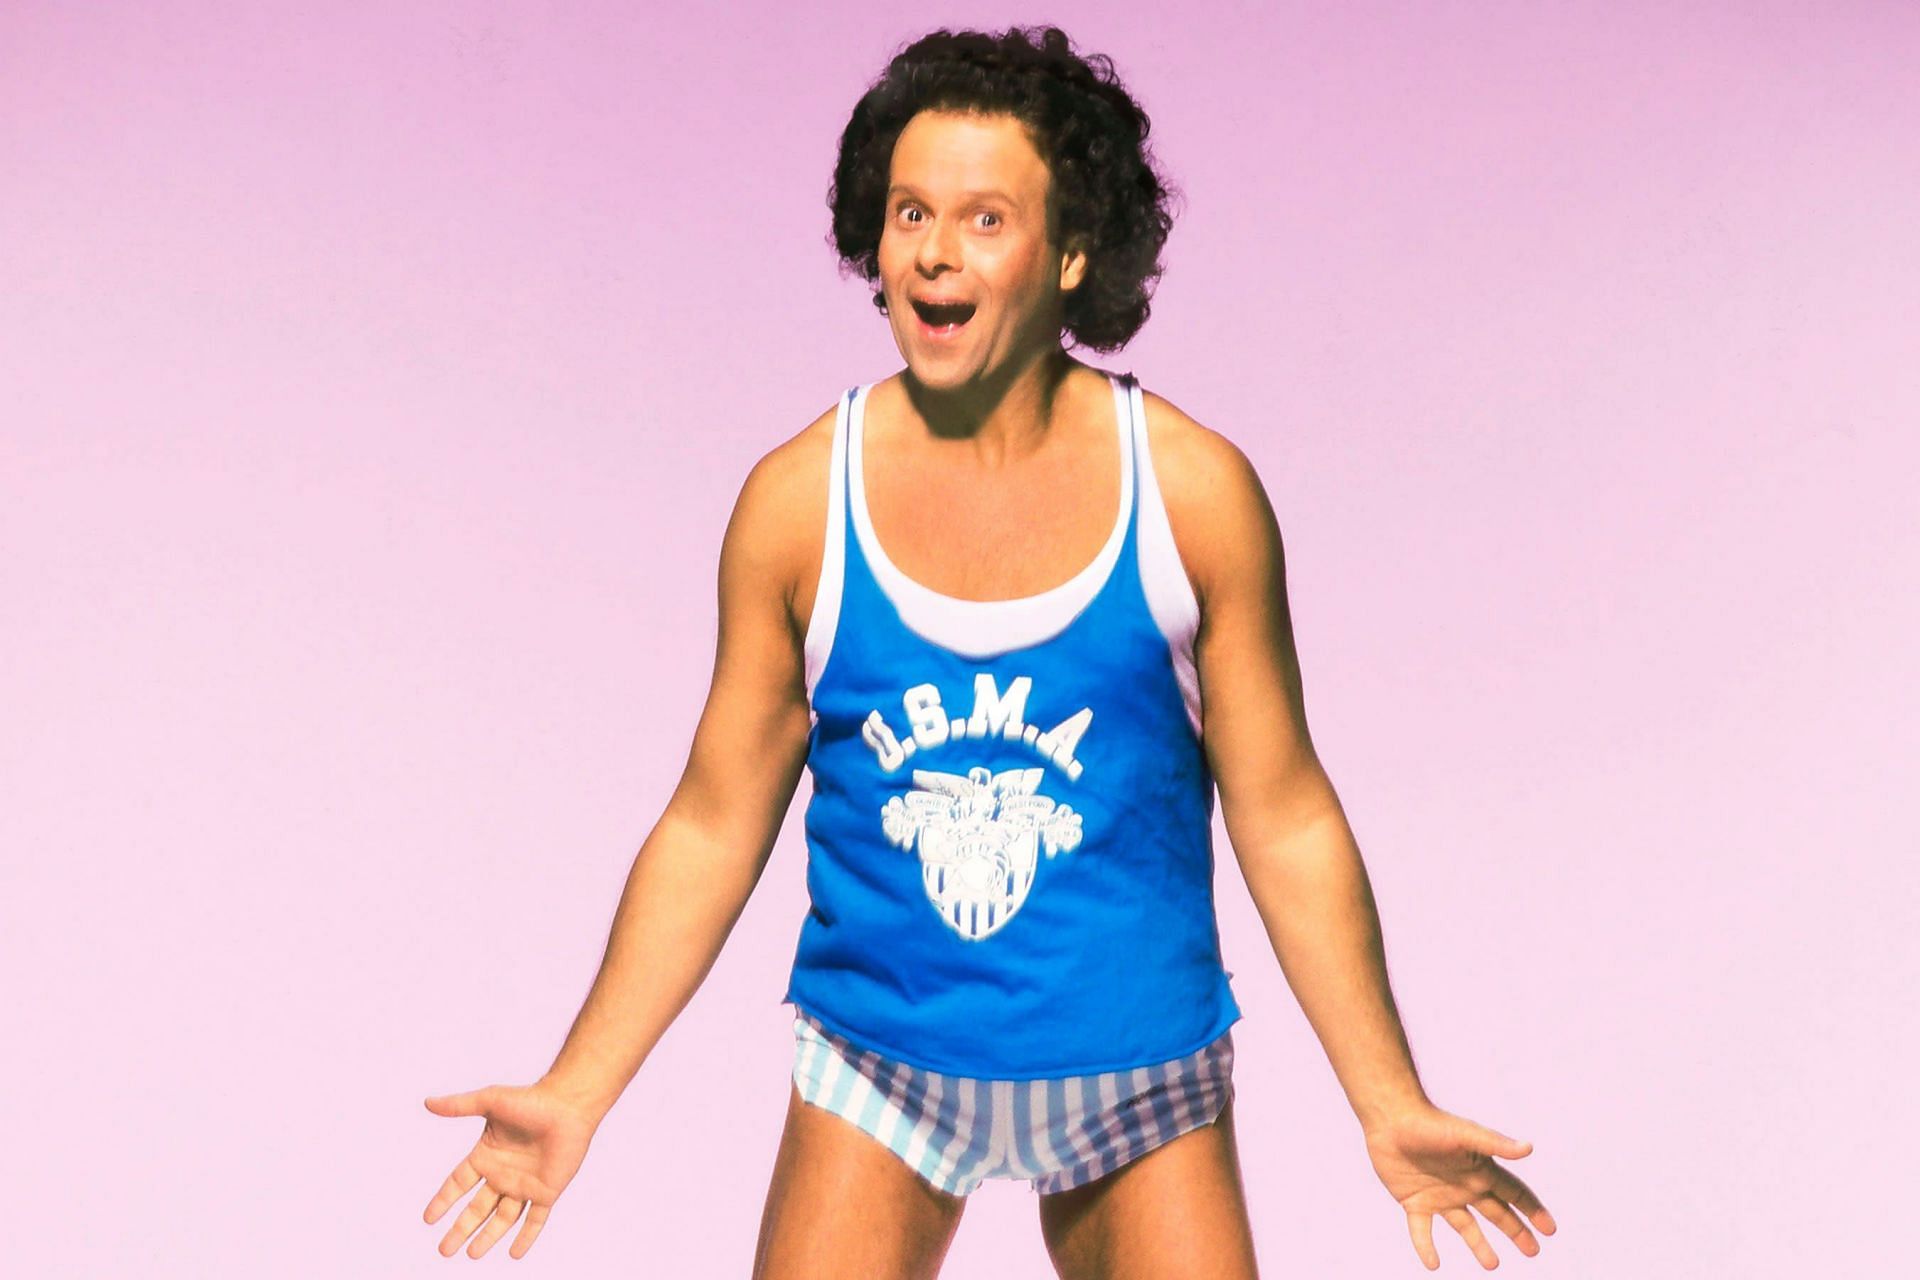 A feature length Richard Simmons biopic starring Pauly Shore is under